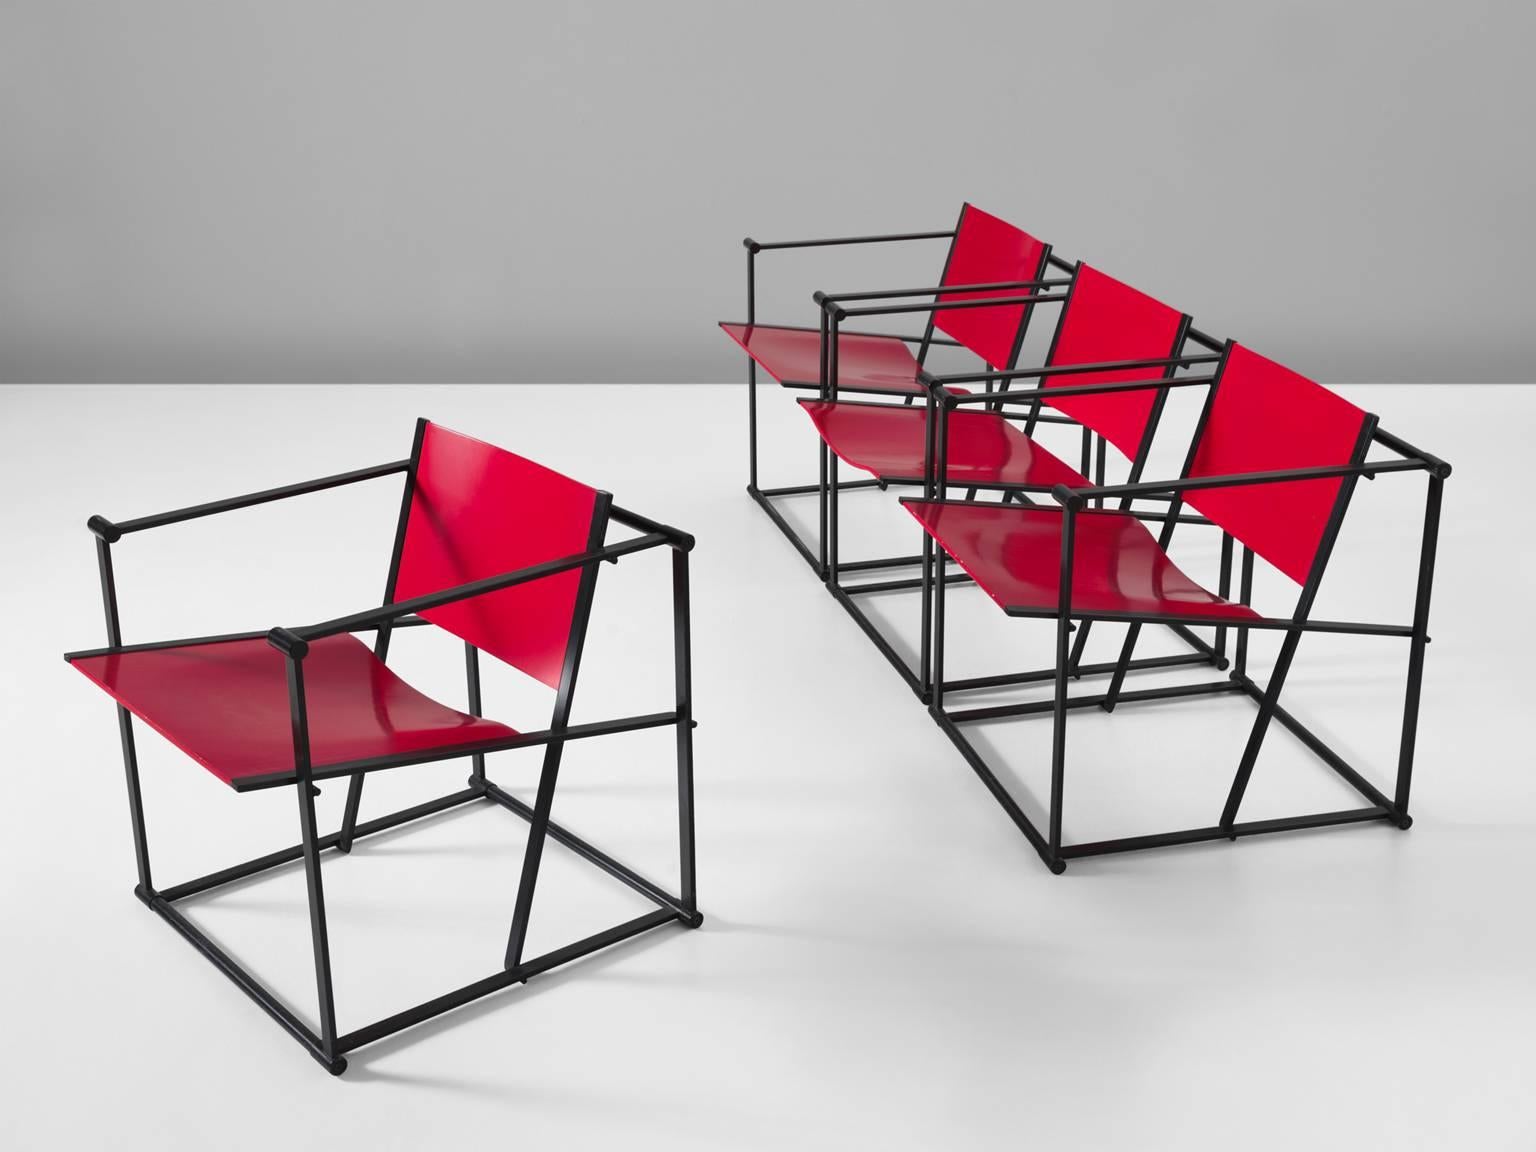 Set of four armchairs model FM61, in steel and red plywood, by Radboud Van Beekum for Pastoe, The Netherlands 1981. 

Cube lounge chairs by Radboud Van Beekum. This model was first presented at the 1980 Triennial in Poznan. After which Pastoe